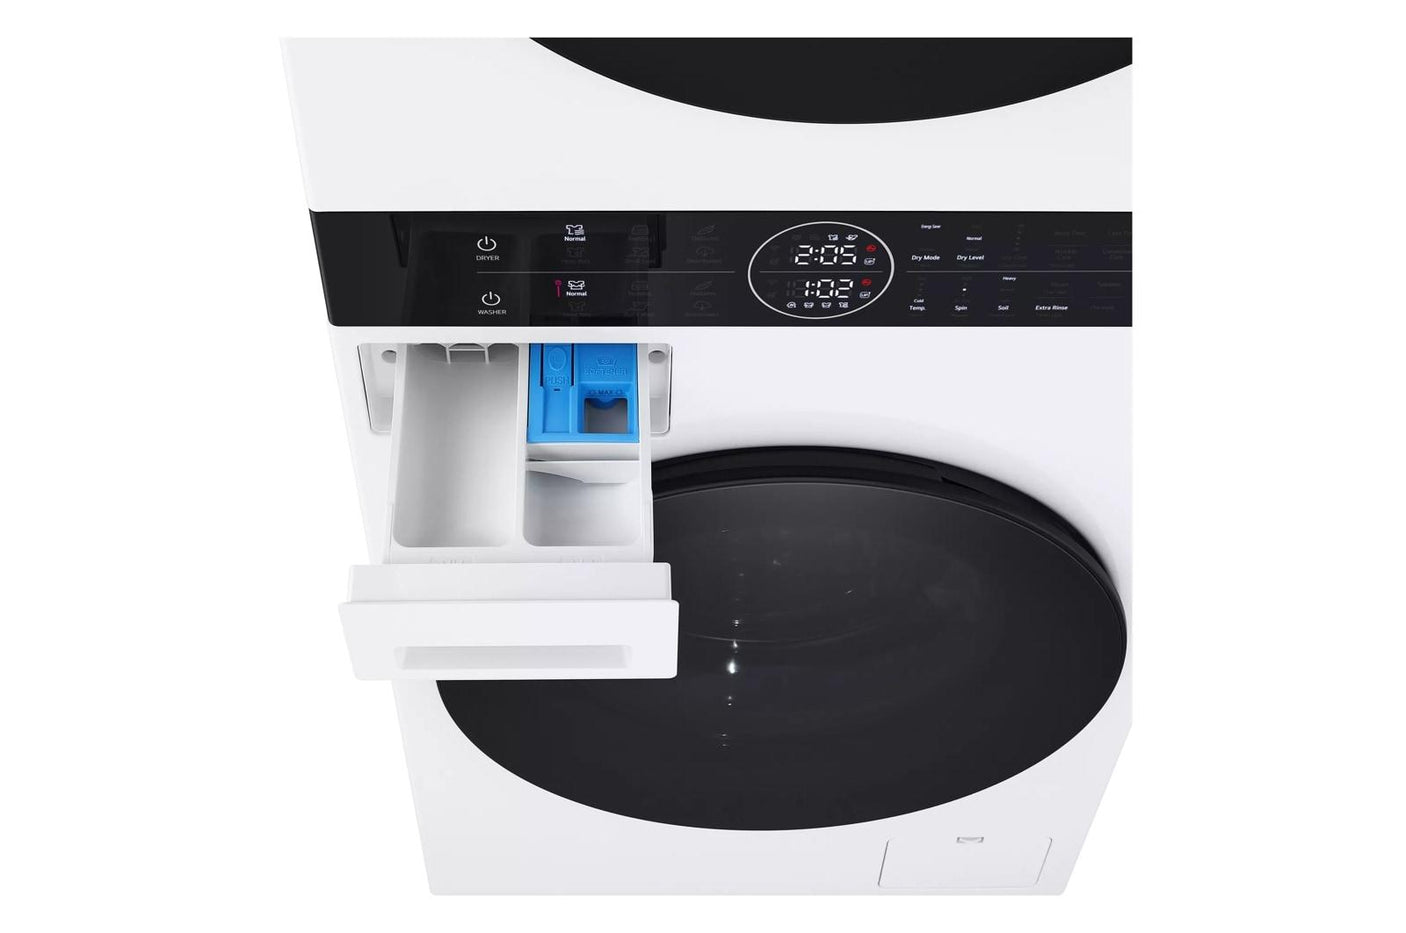 Compact Single Unit LG WashTower™ with Center Control™ 2.4 cu.ft. Front Load Washer and 4.2 cu.ft. Electric Ventless HeatPump™ Dryer